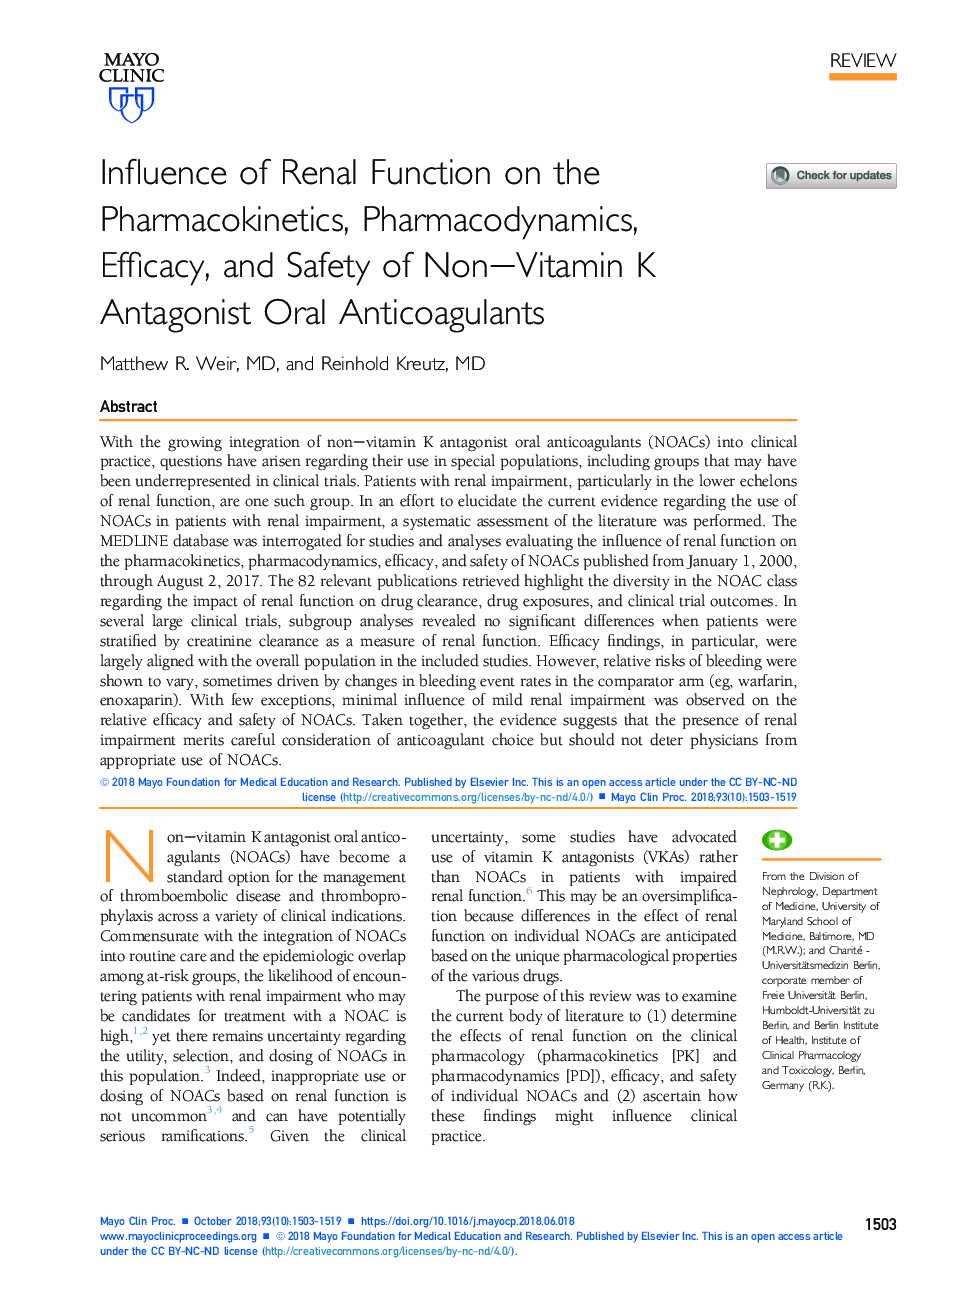 Influence of Renal Function on the Pharmacokinetics, Pharmacodynamics, Efficacy, and Safety of Non-Vitamin K Antagonist Oral Anticoagulants